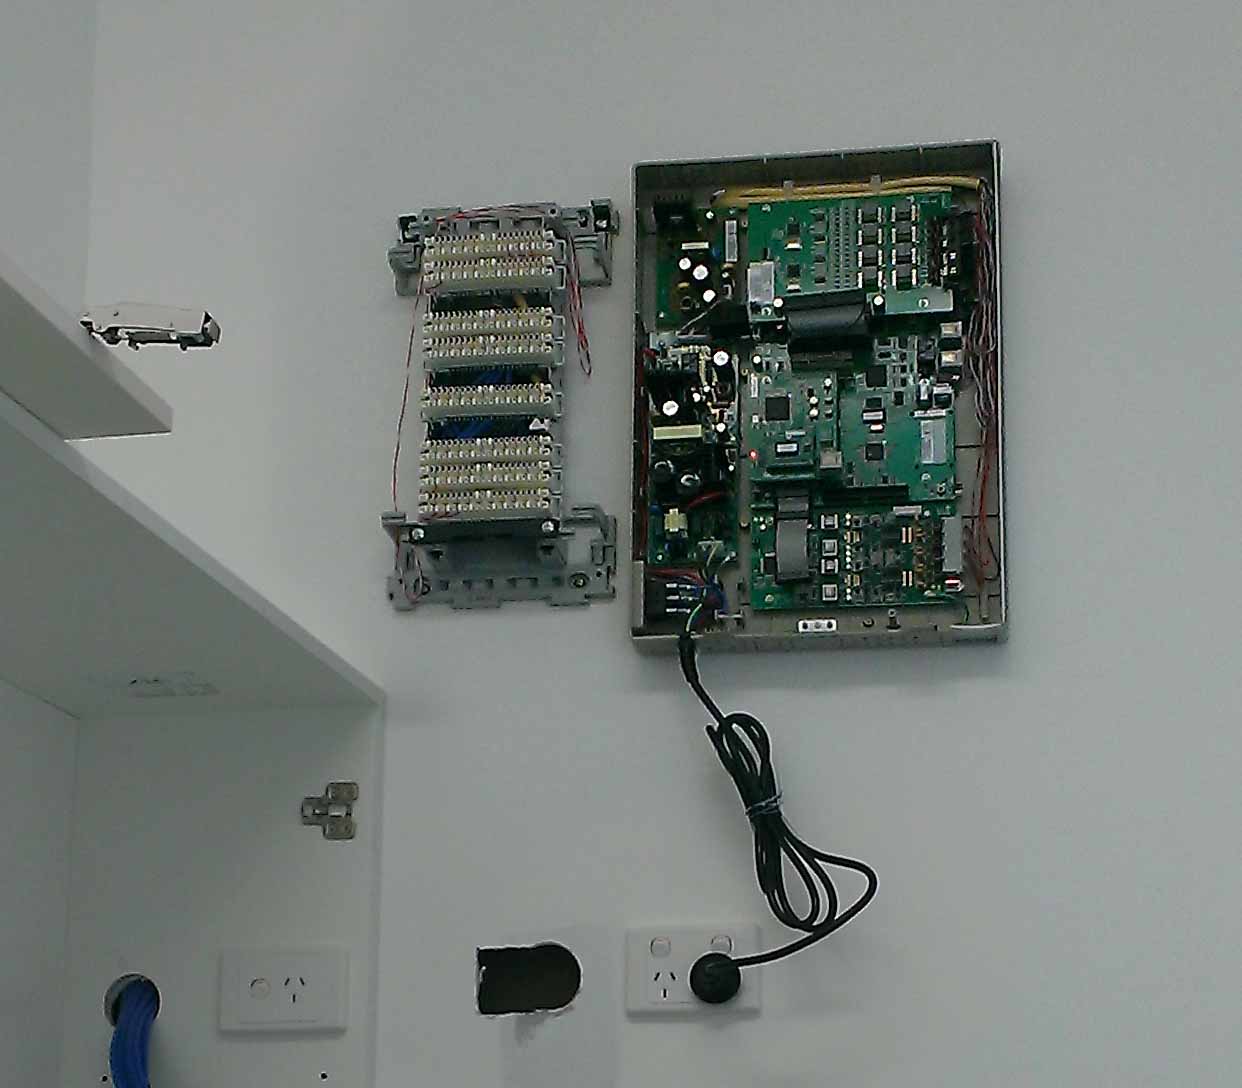 The neatly organised Internal wiring keeps the wall tidy when possible